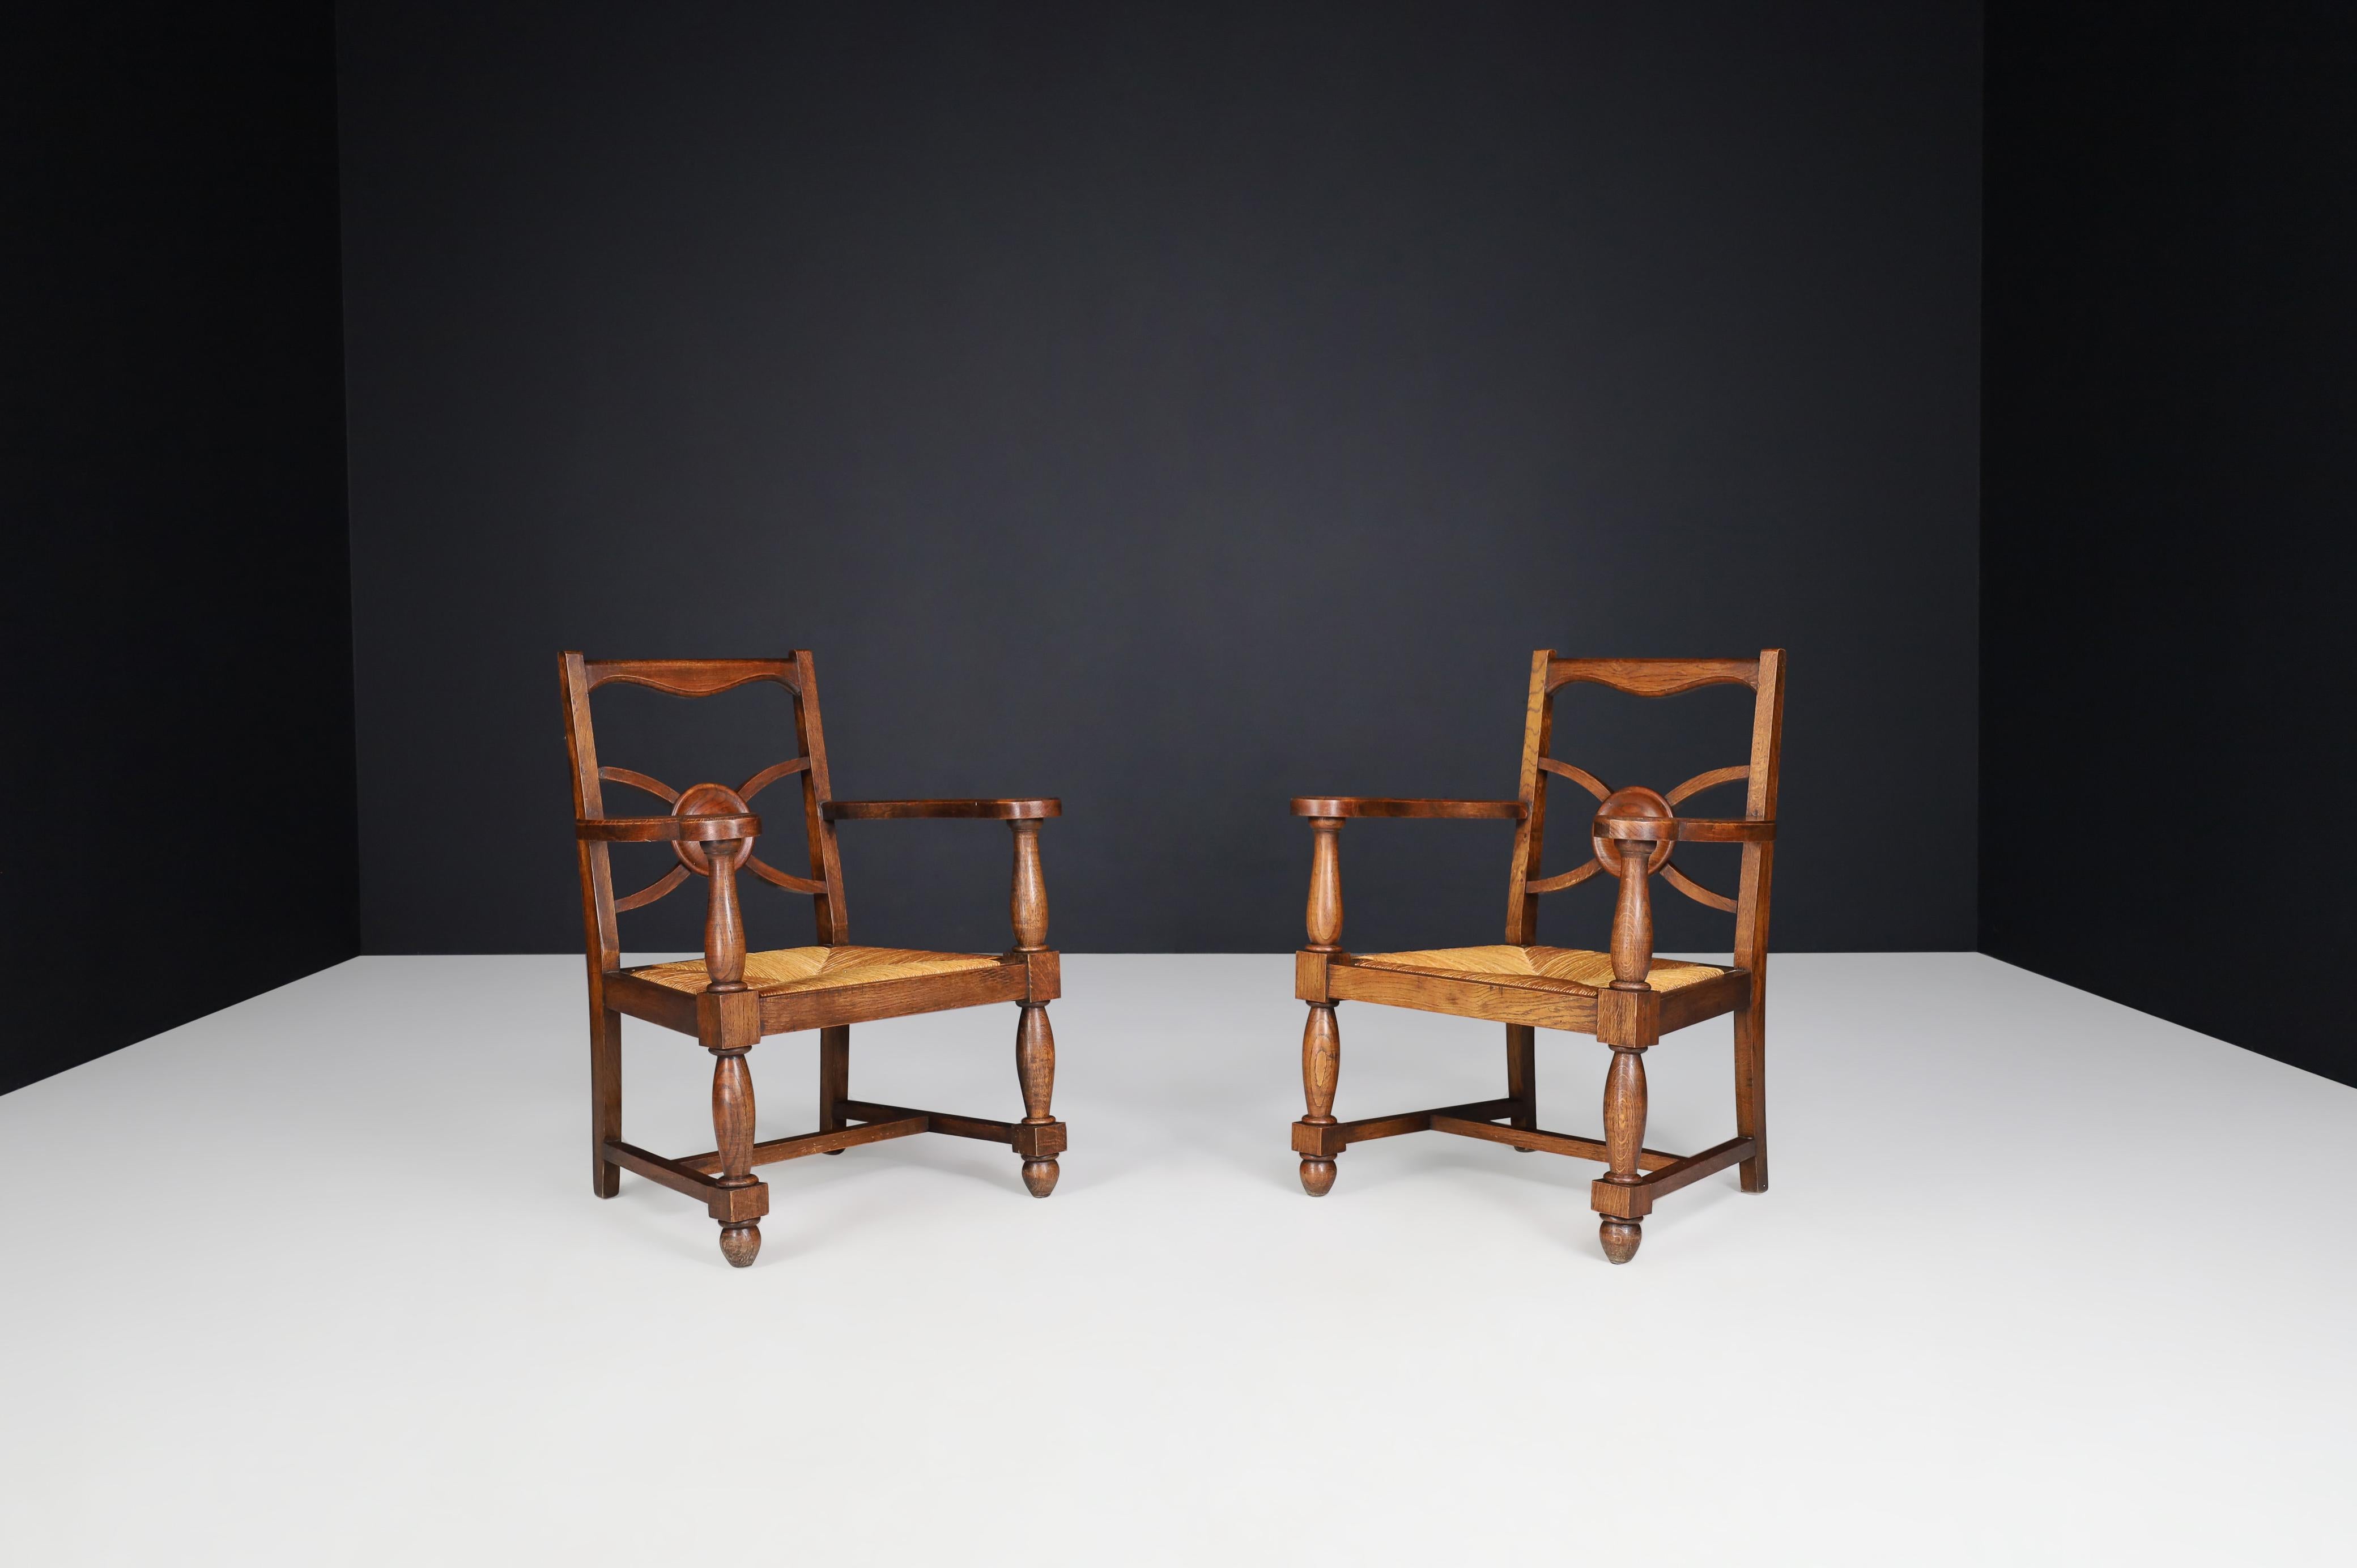 Art Deco Armchairs in oak and rush, France 1930s.

These gorgeous art-deco armchairs were crafted in France, circa 1930. Fantastic good original condition with a lovely patina. These chairs would be an eye-catching addition to any interior, such